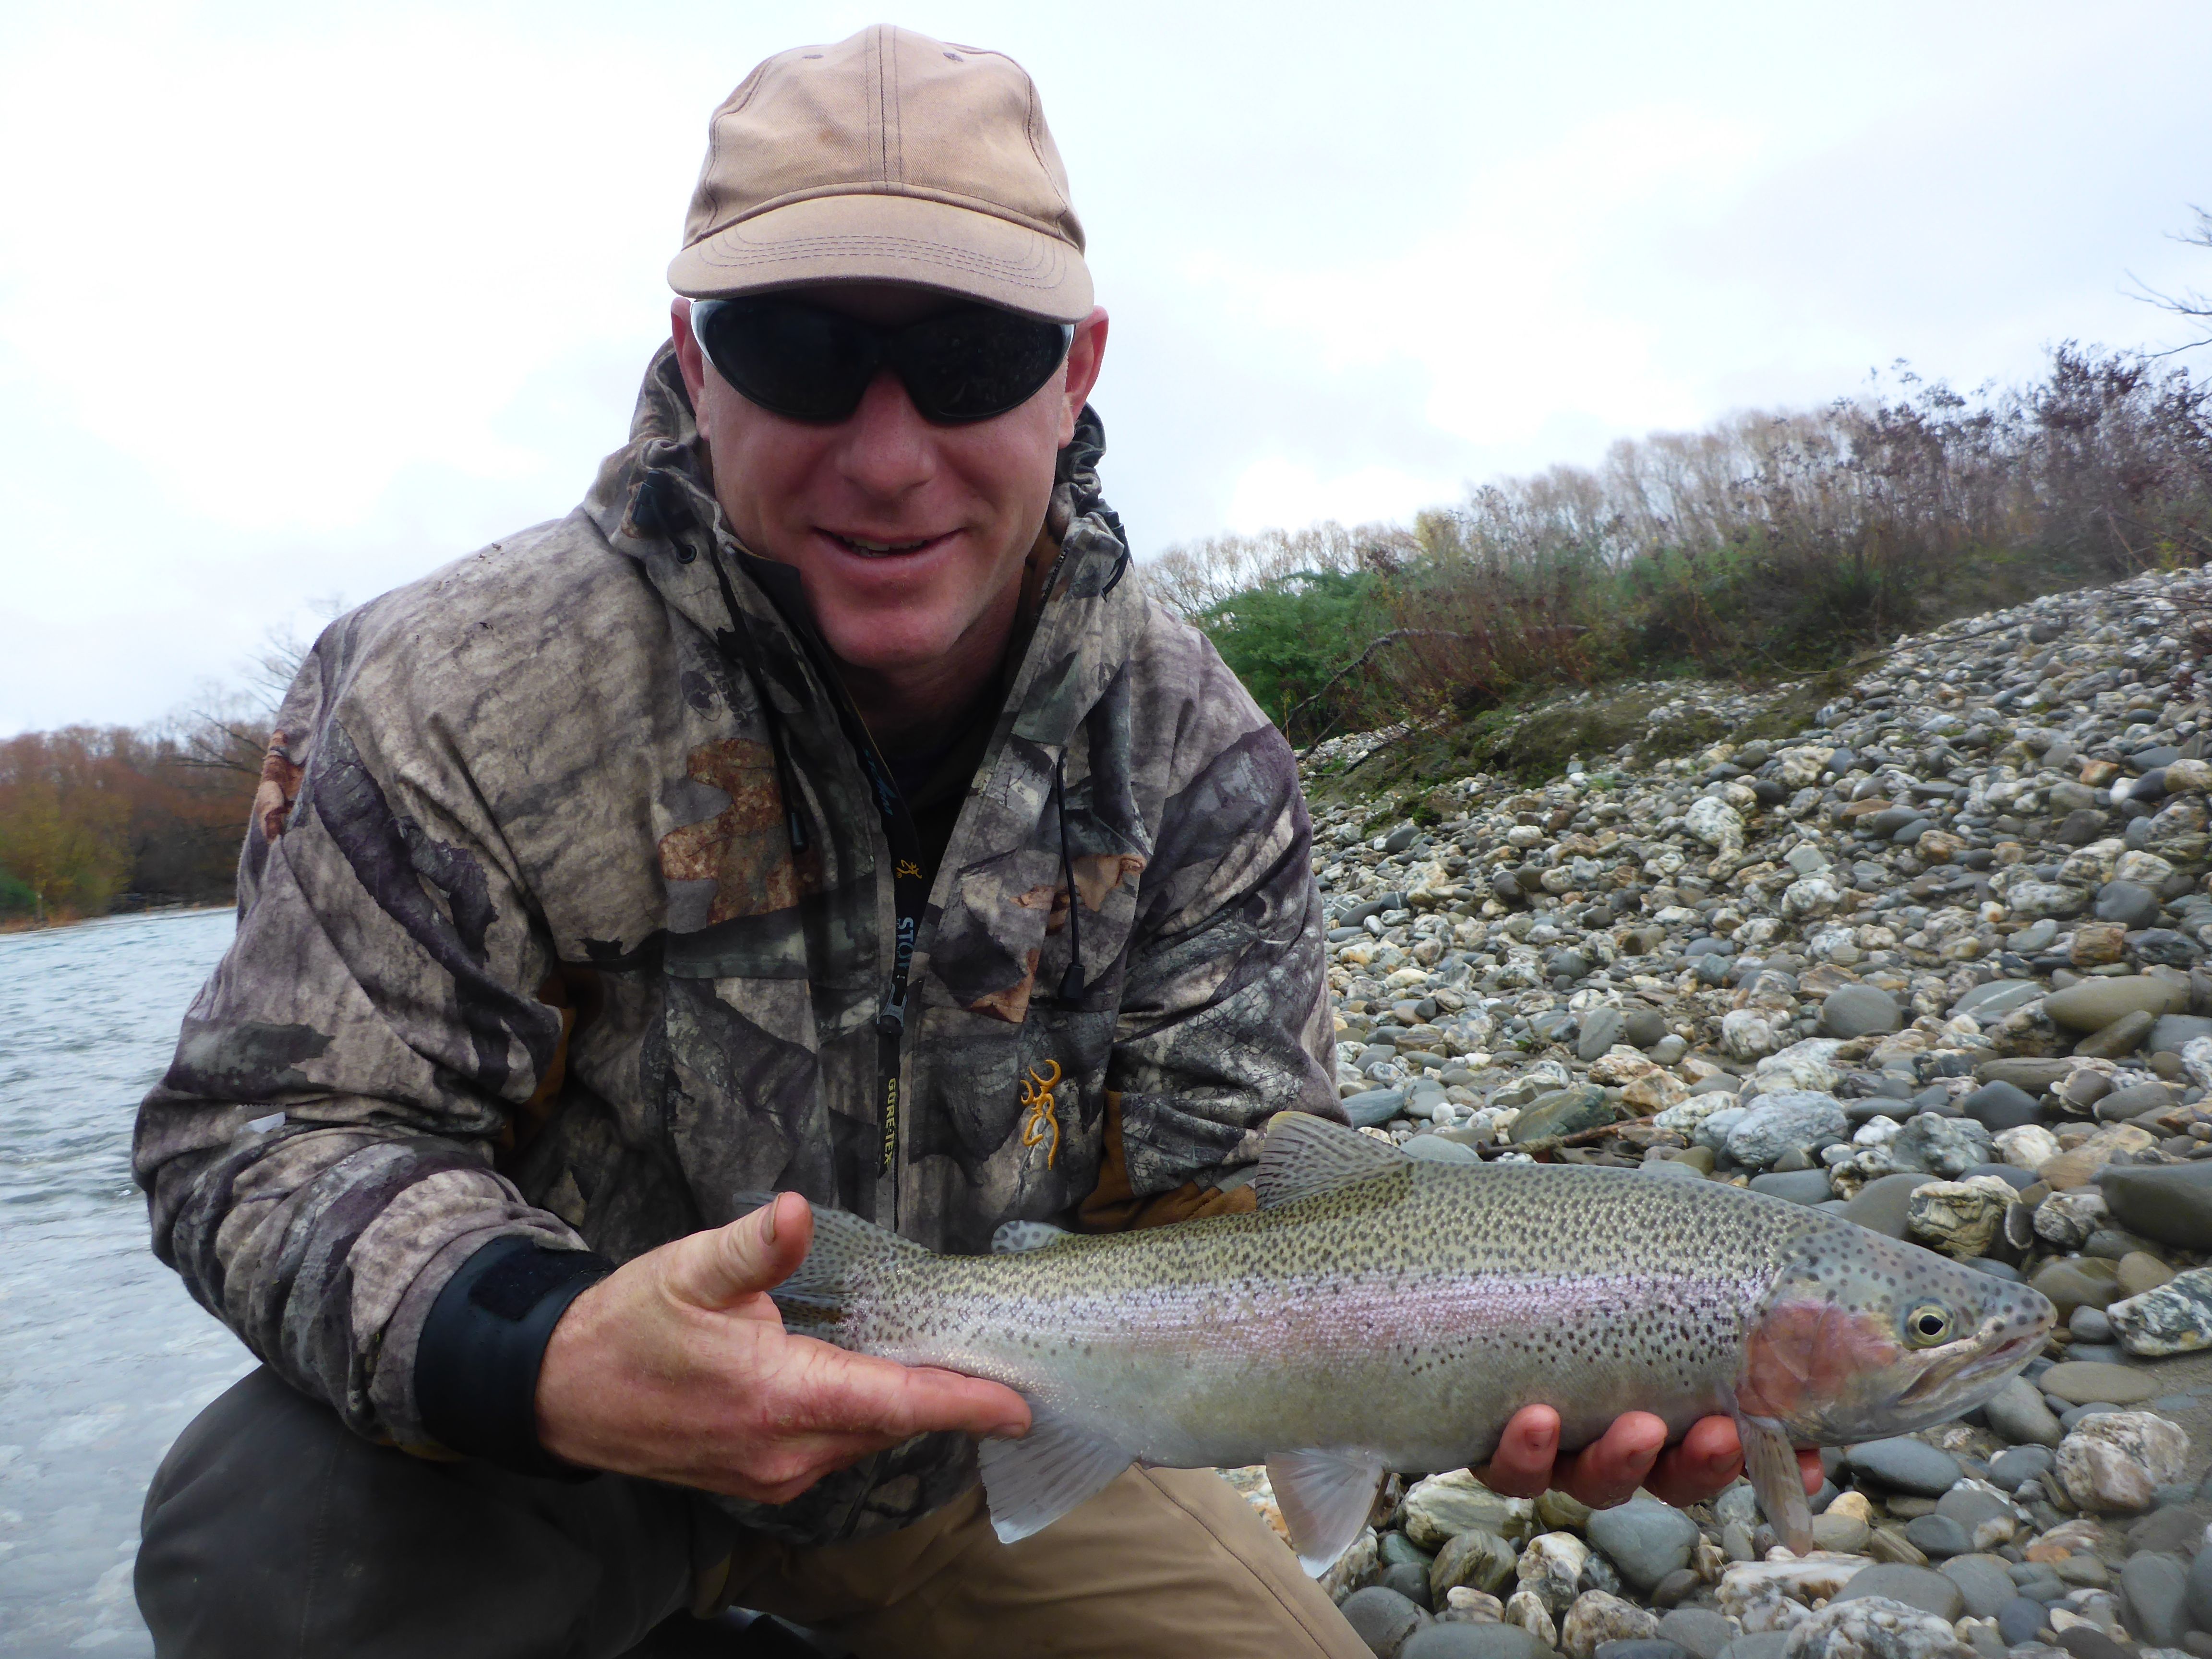 Shotgun-Kevin with a nice feisty May rainbow!